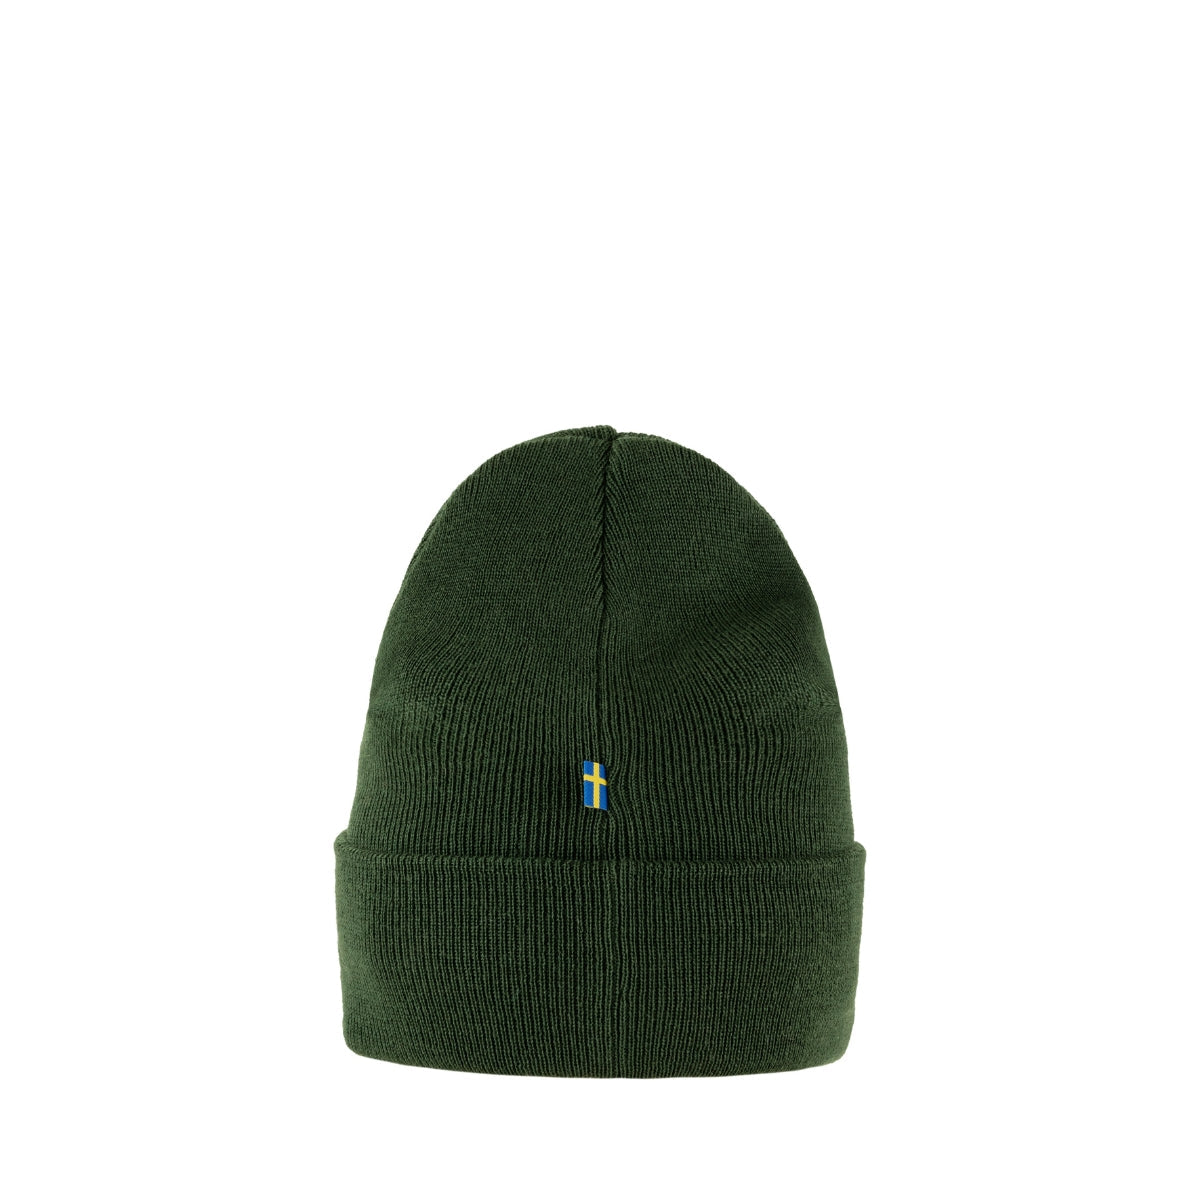 Fjallraven Classic Knit Hat in Deep Forest